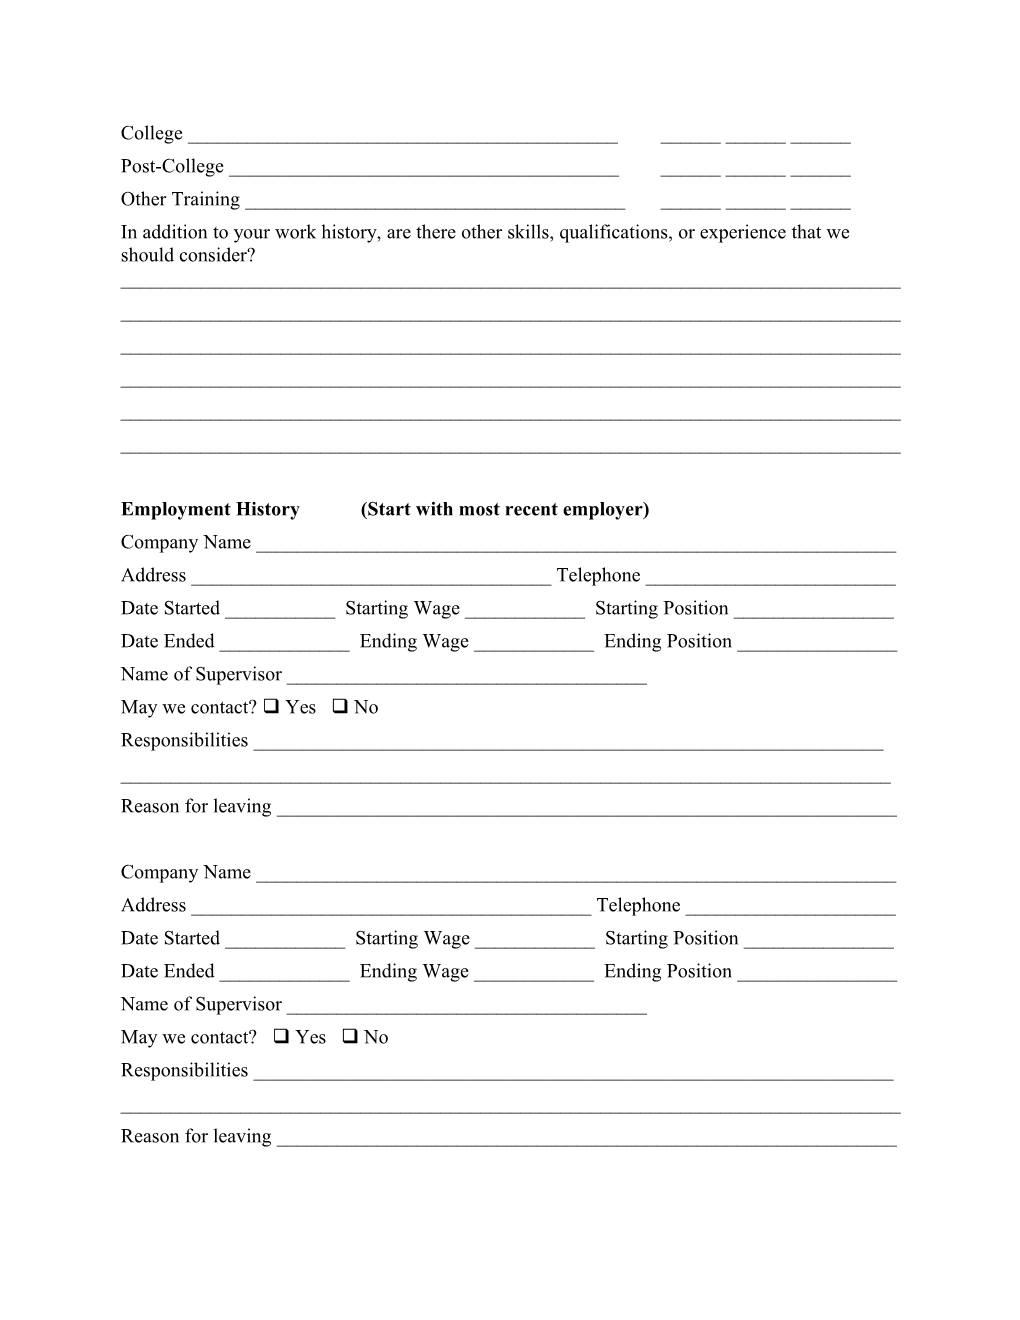 Application for Employment s63